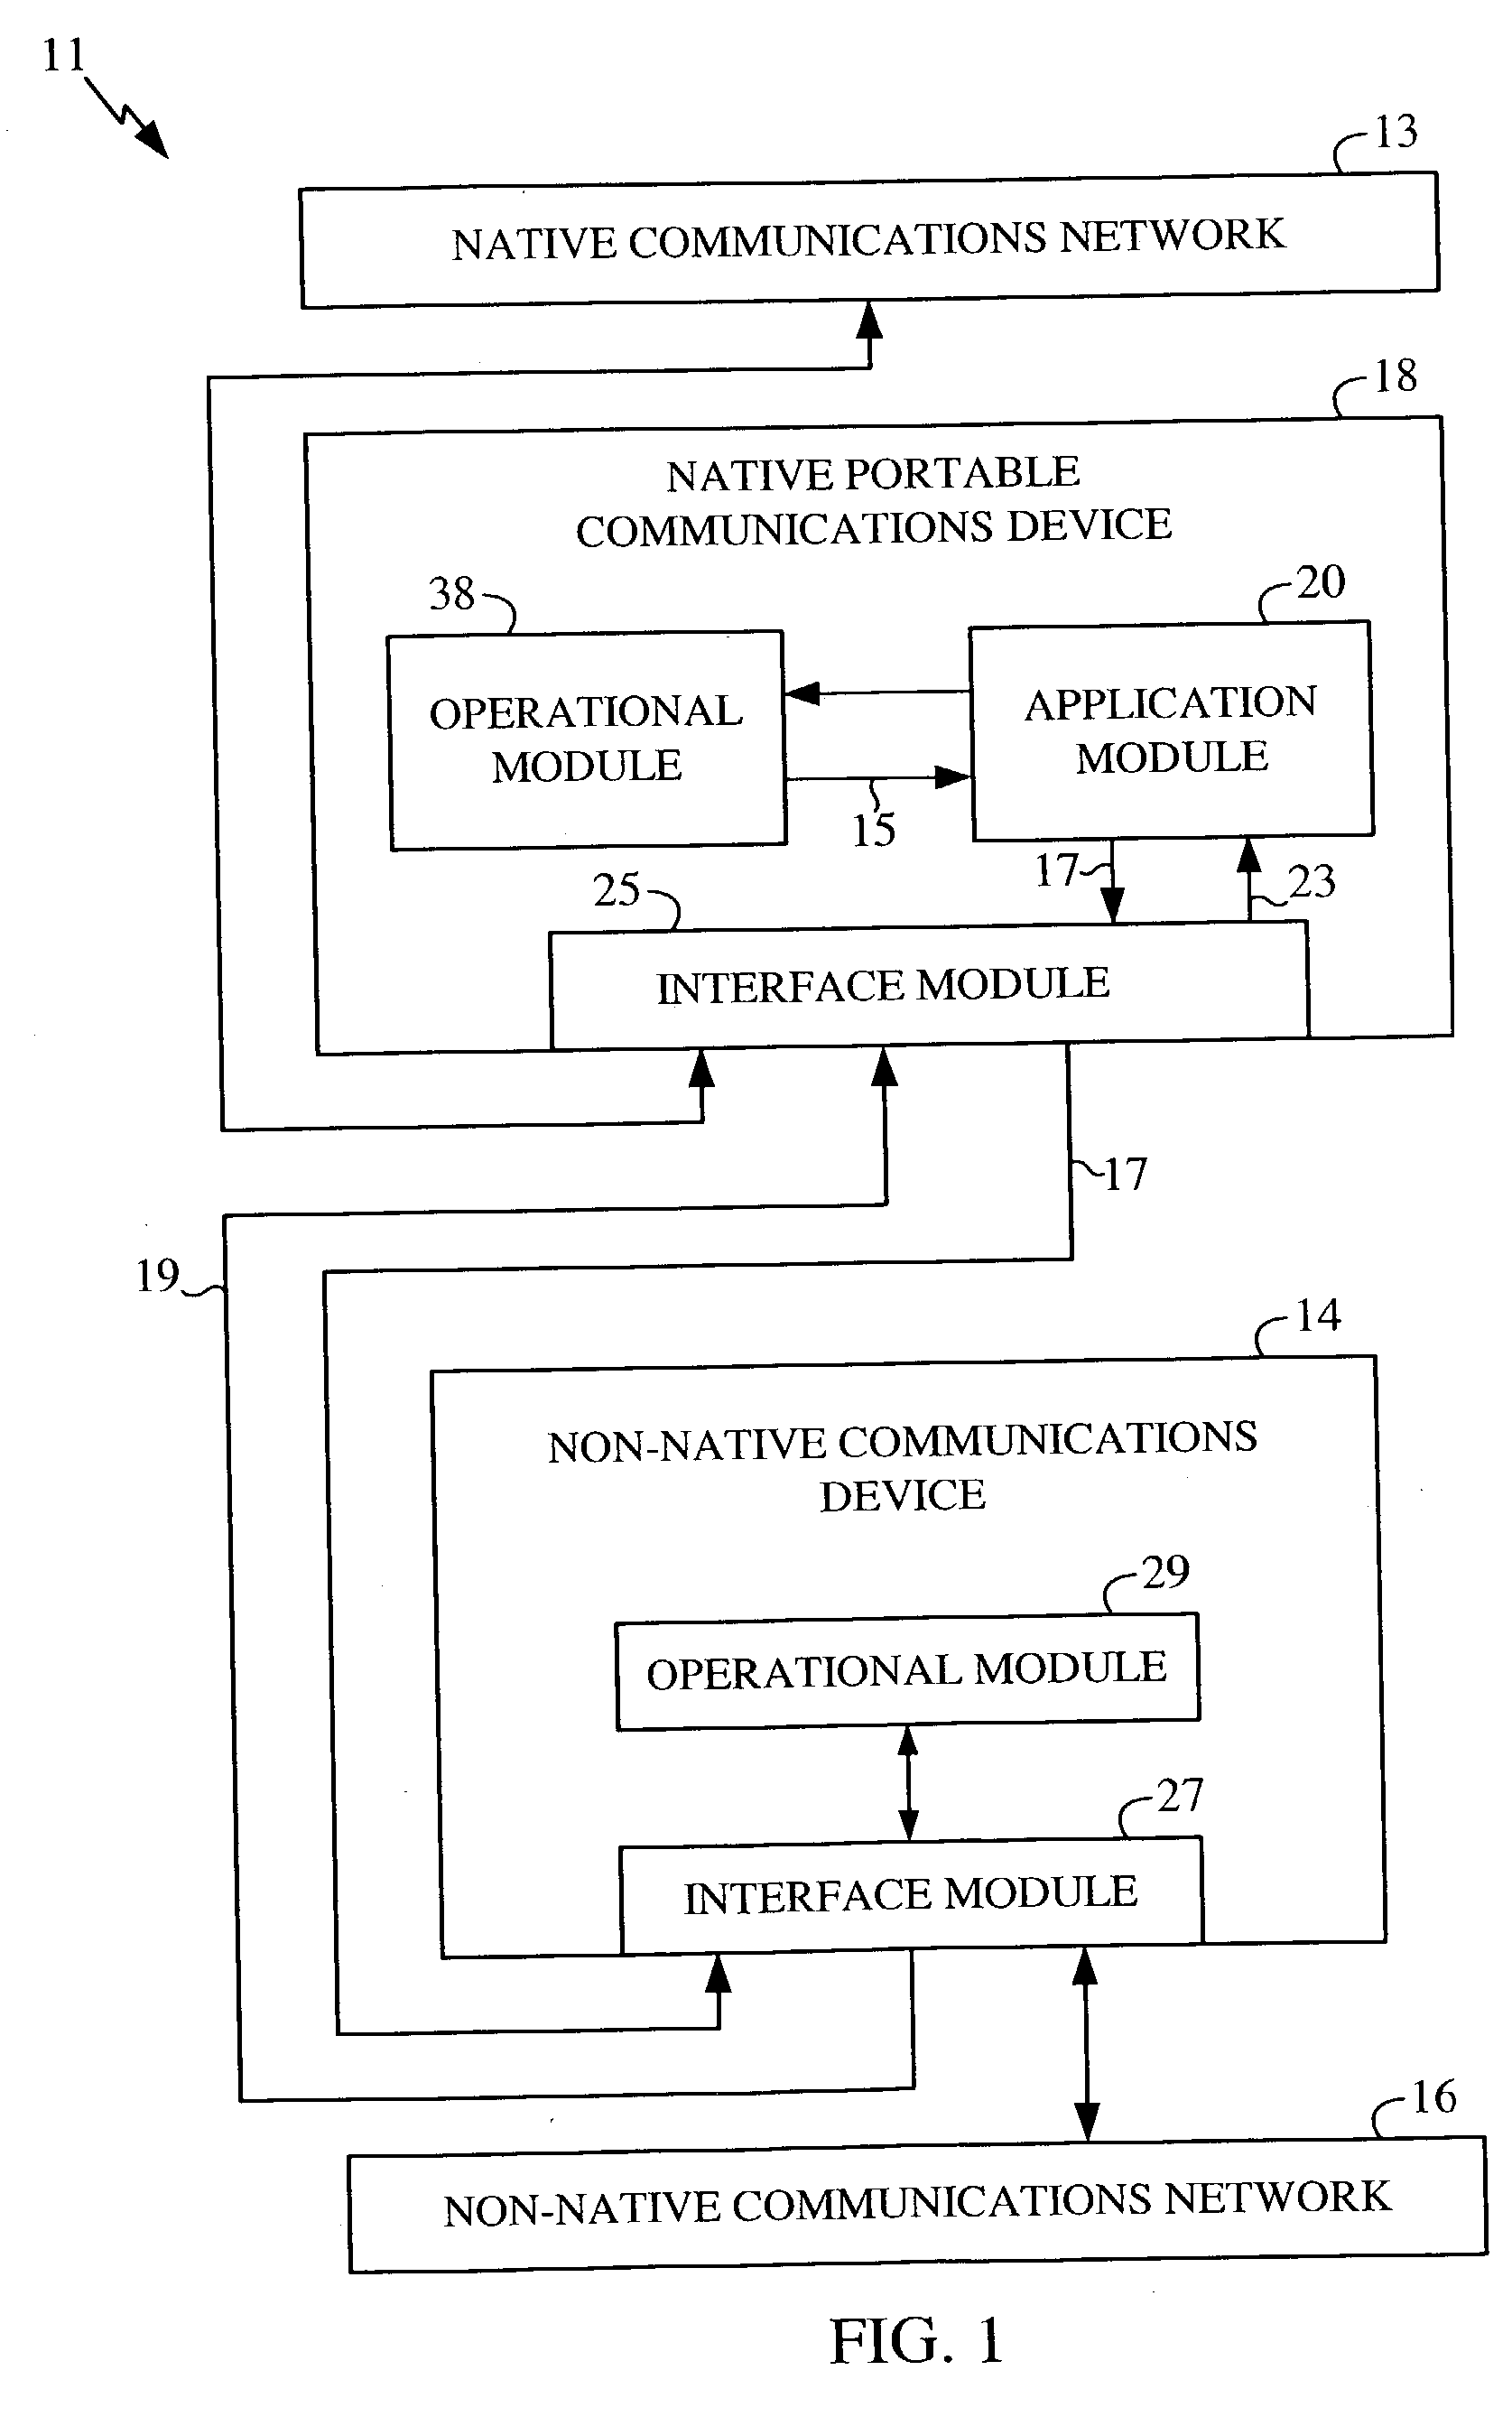 Systems and methods for utilizing an application from a native portable device within a non-native communications network